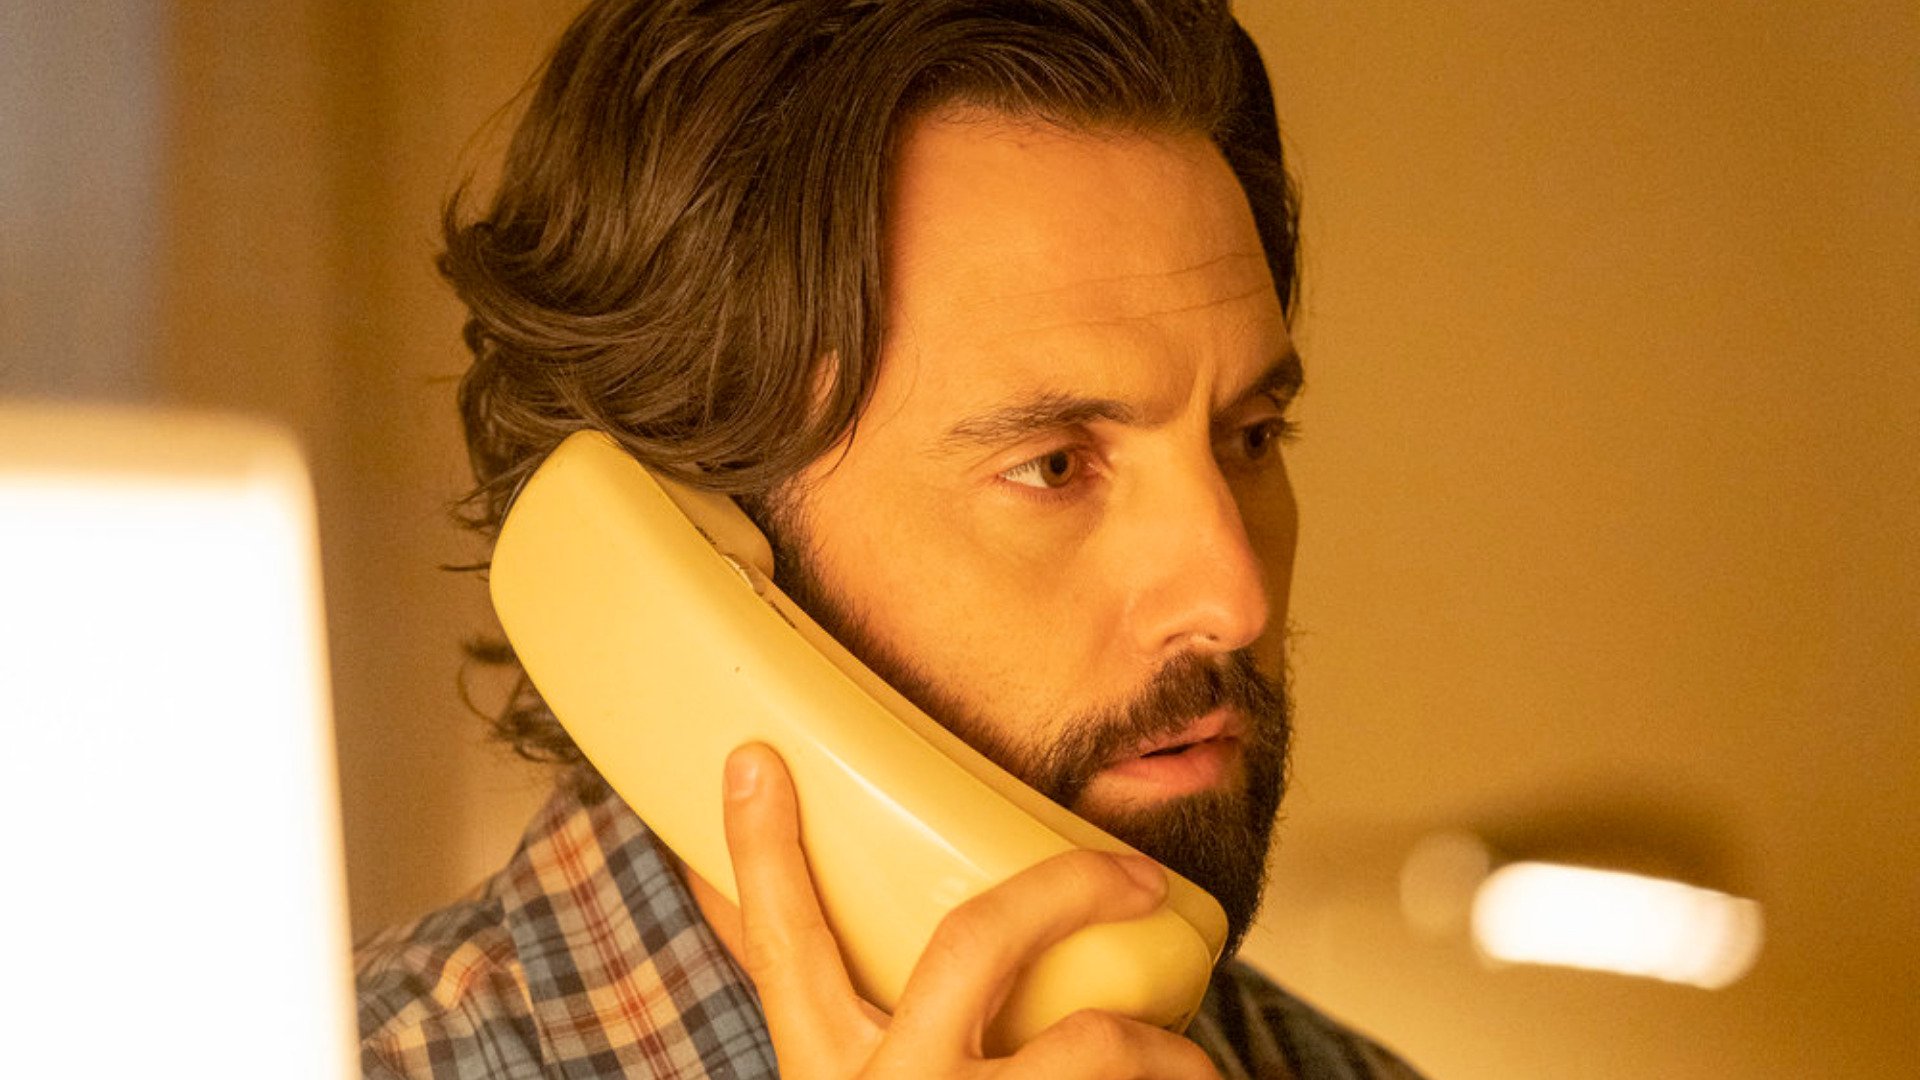 ‘This Is Us’ Season 6 Episode 3 Preview Teases Big Moments for Kevin, Randall, and Jack Next Week